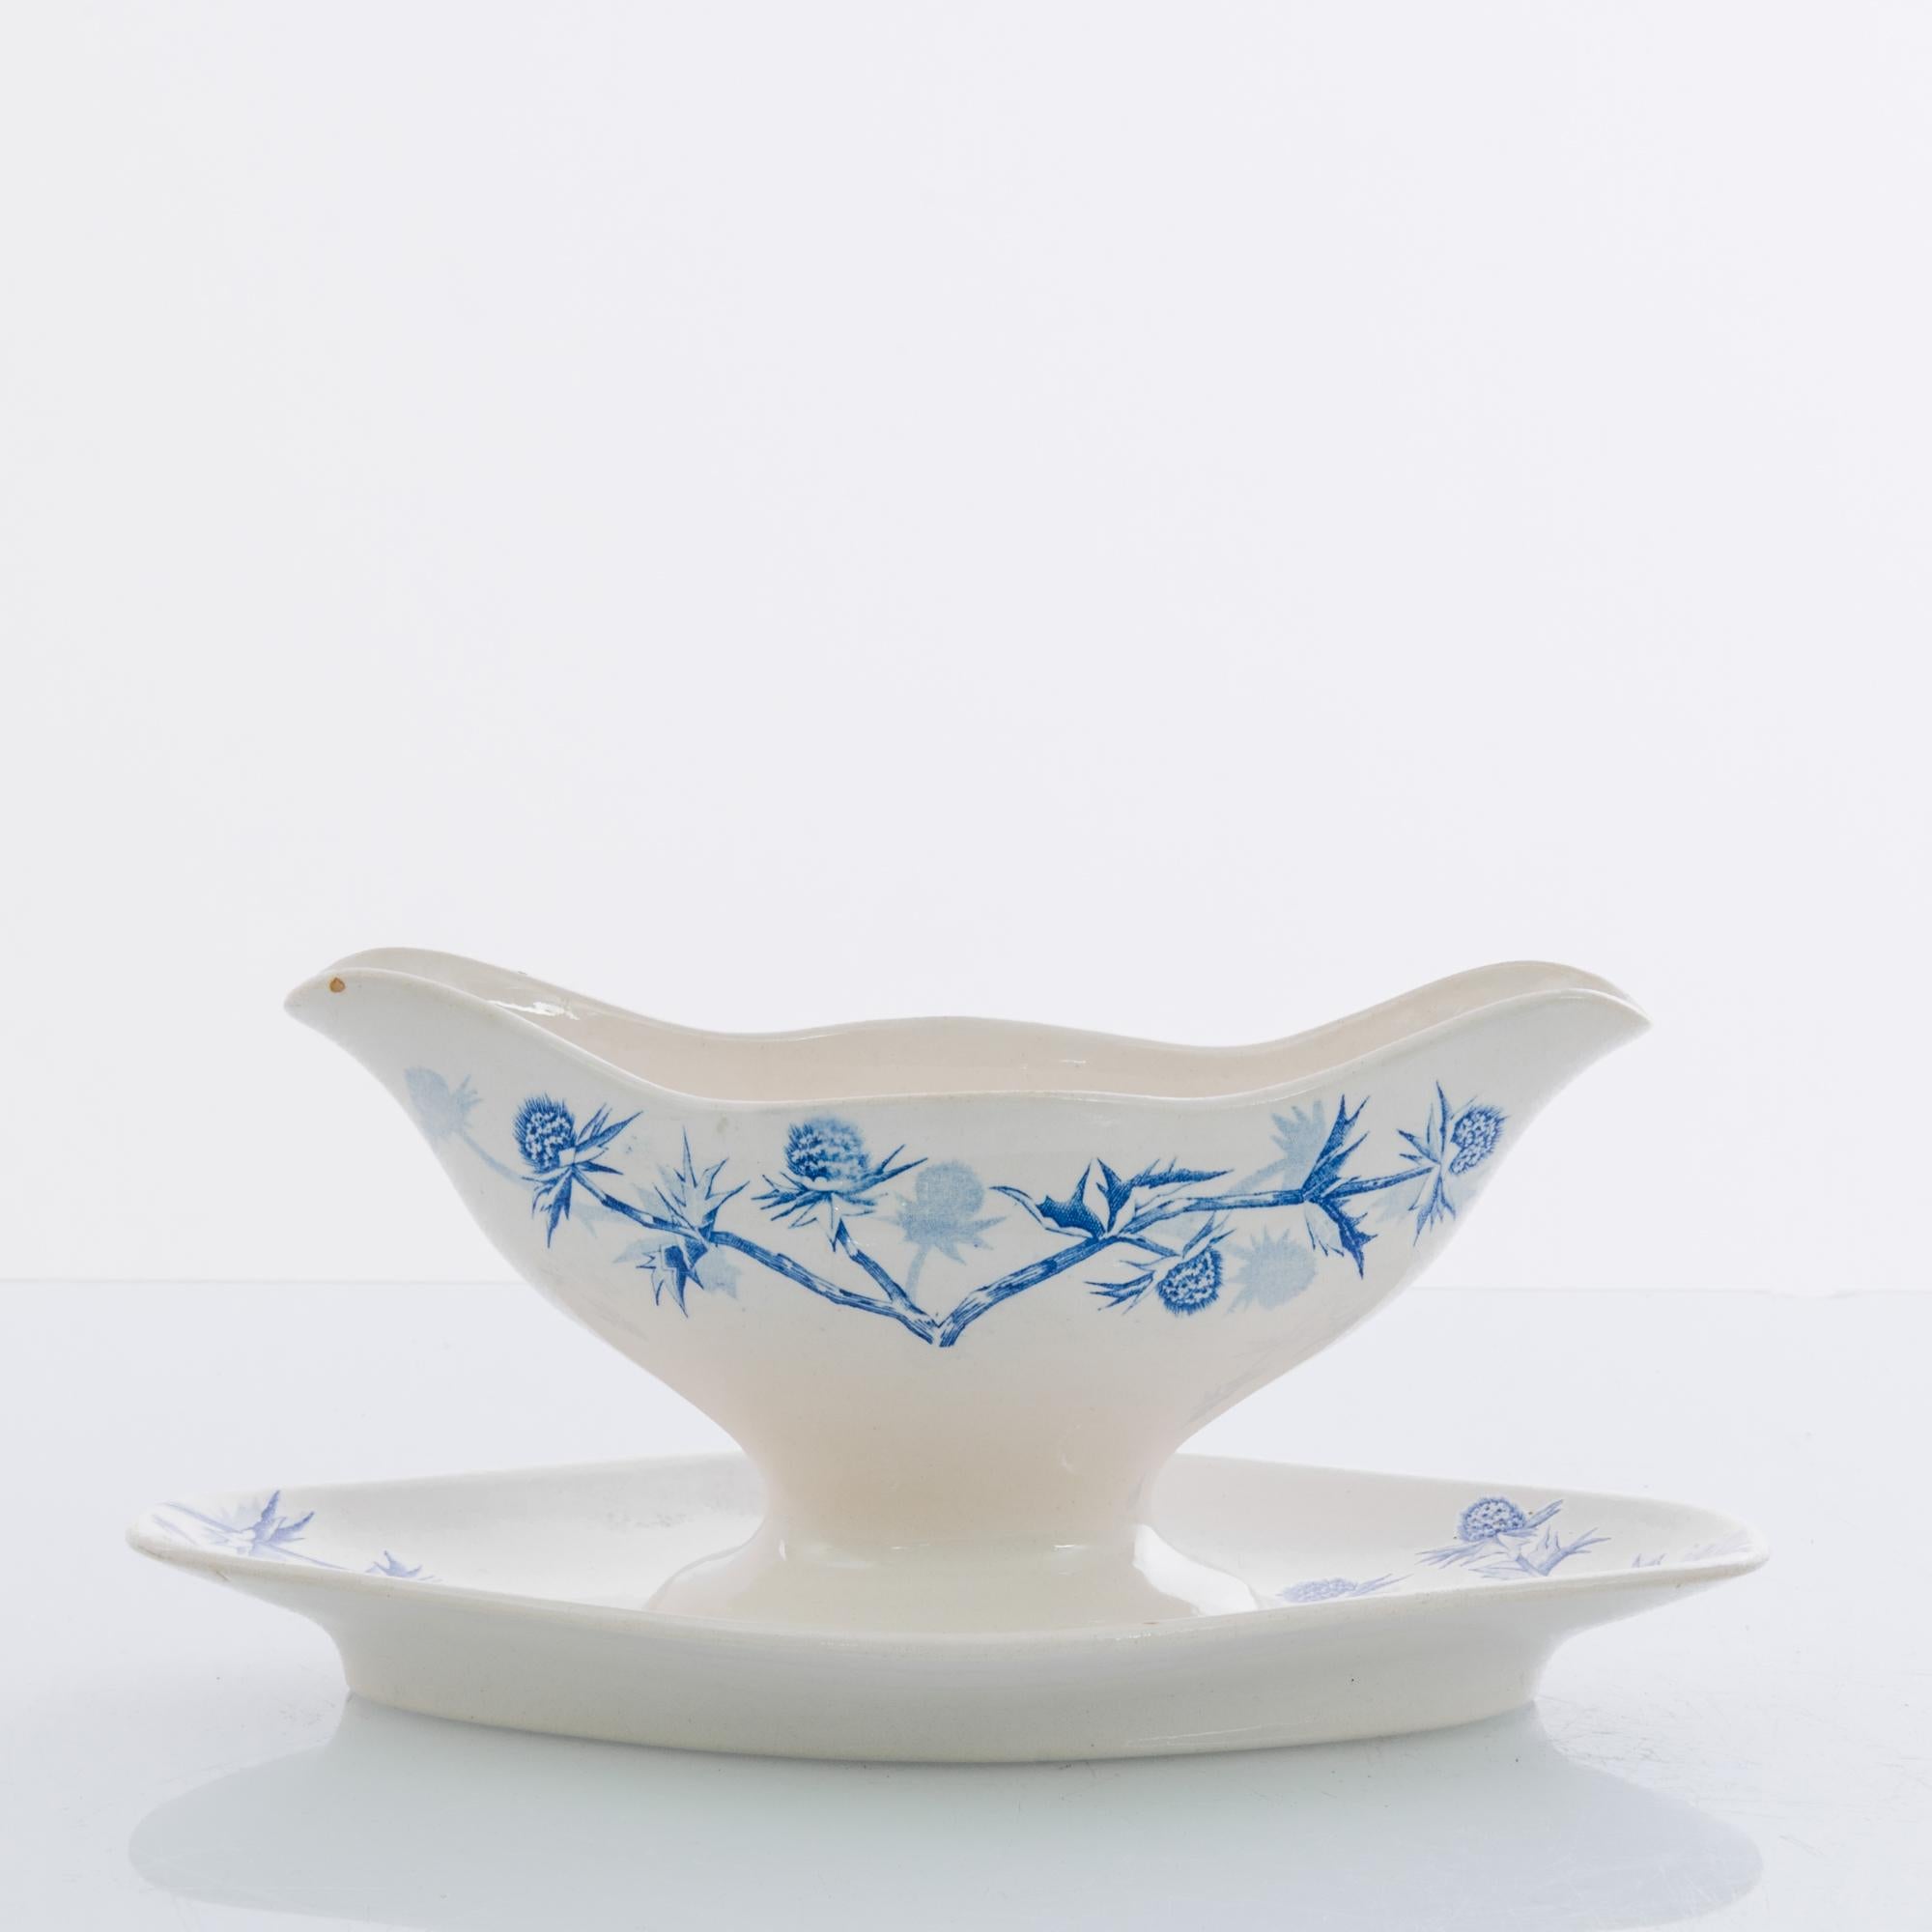 A ceramic sauceboat from Germany, circa 1900. White china is decorated with an intricate pattern of slender stems and symmetrical buds in indigo blue. The delicate contour and out-turned lip of the sauceboat suggests the shape of a tulip; beneath, a